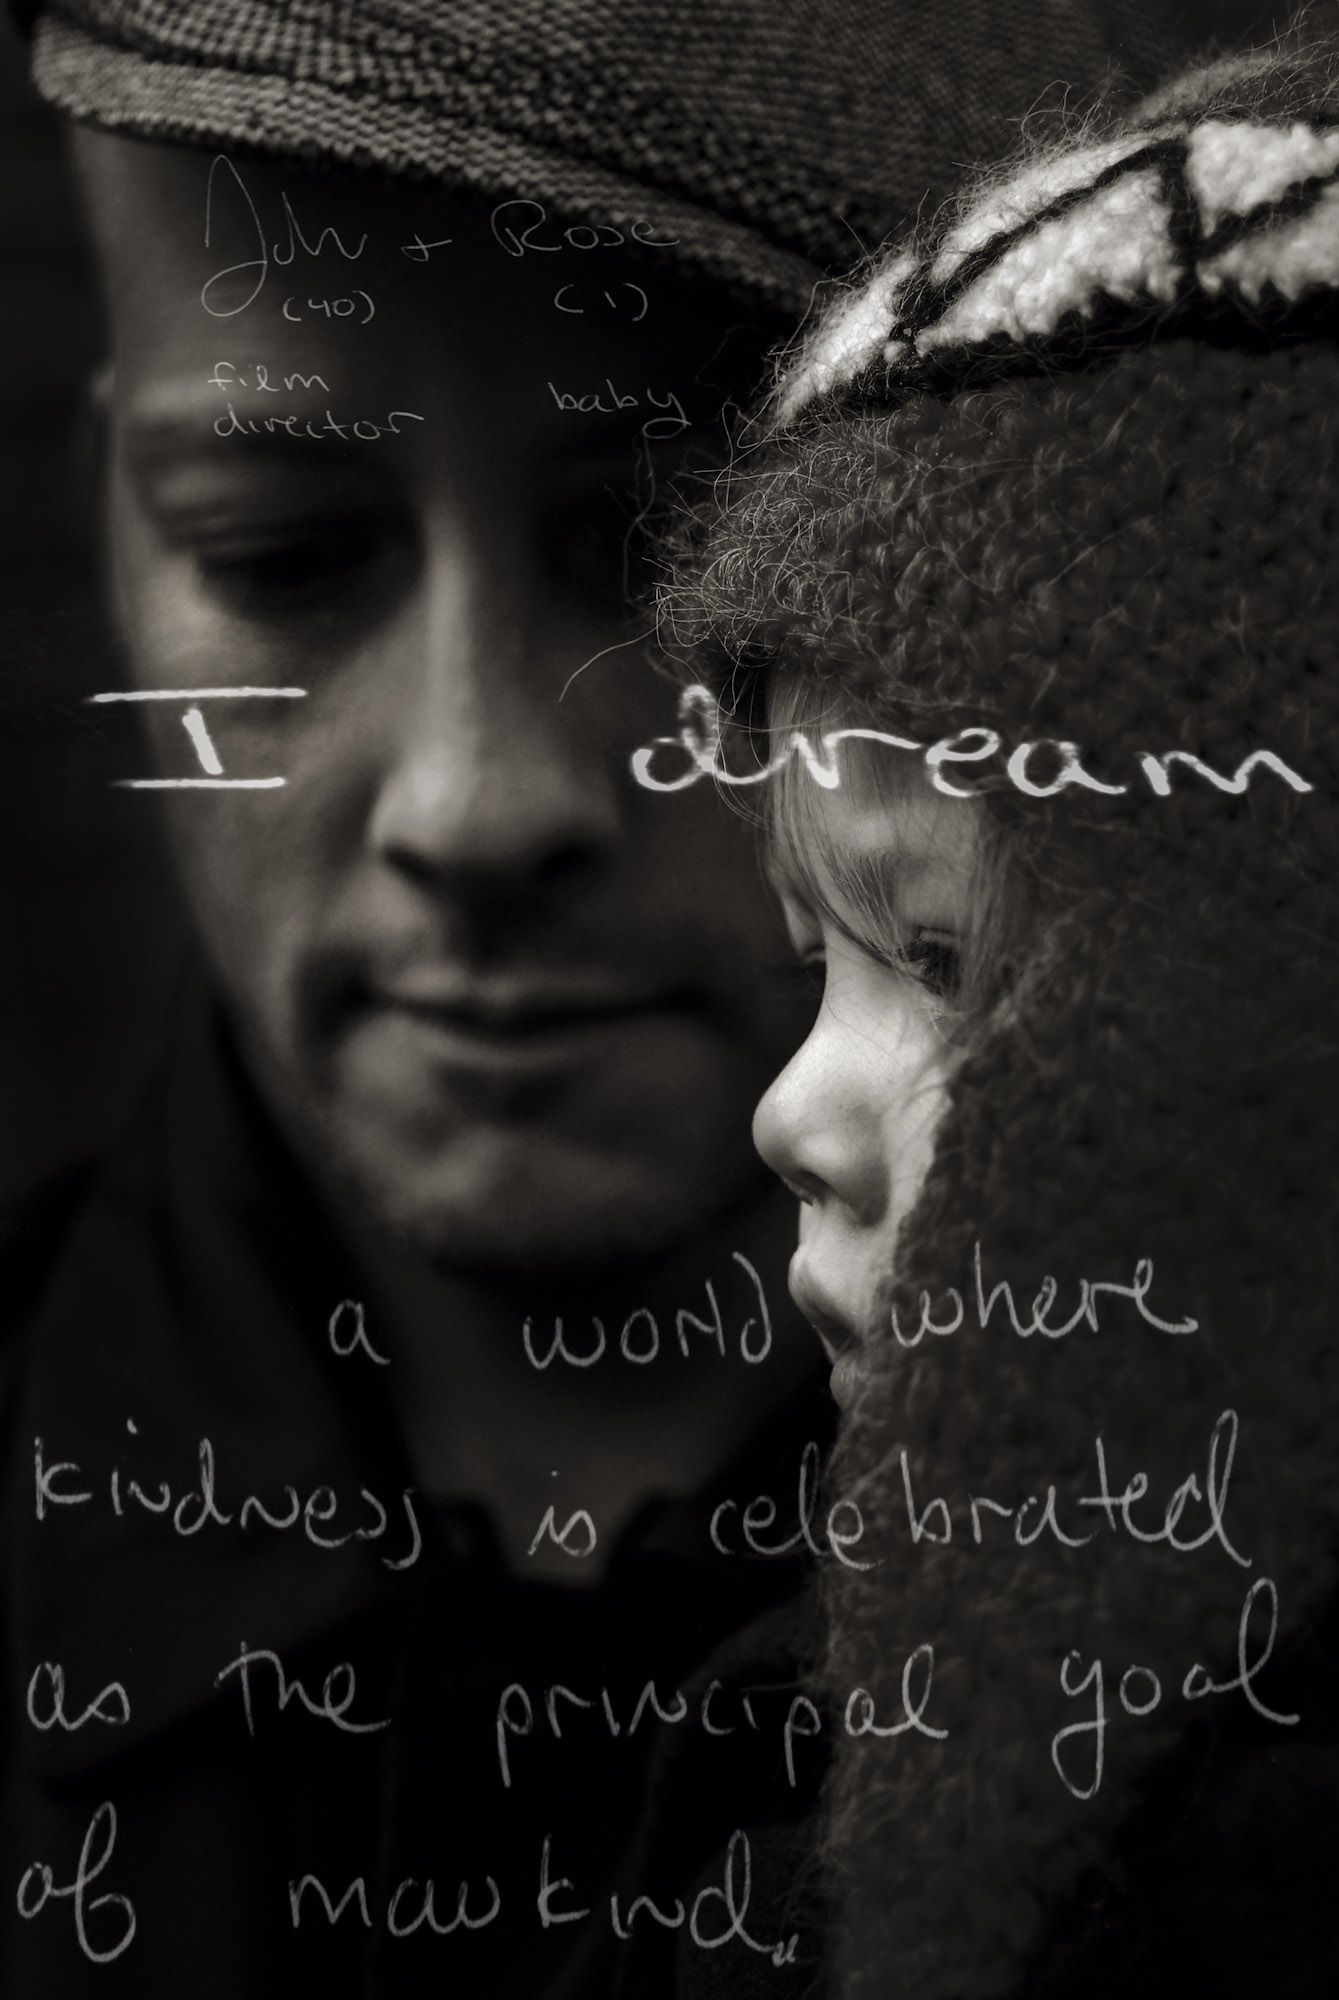 John 40 years old, film director, with Rose, 1 year old, New York City, United States, 11/05/2006      I dream a world where kindness is celebrated as the principal goal of mankind.